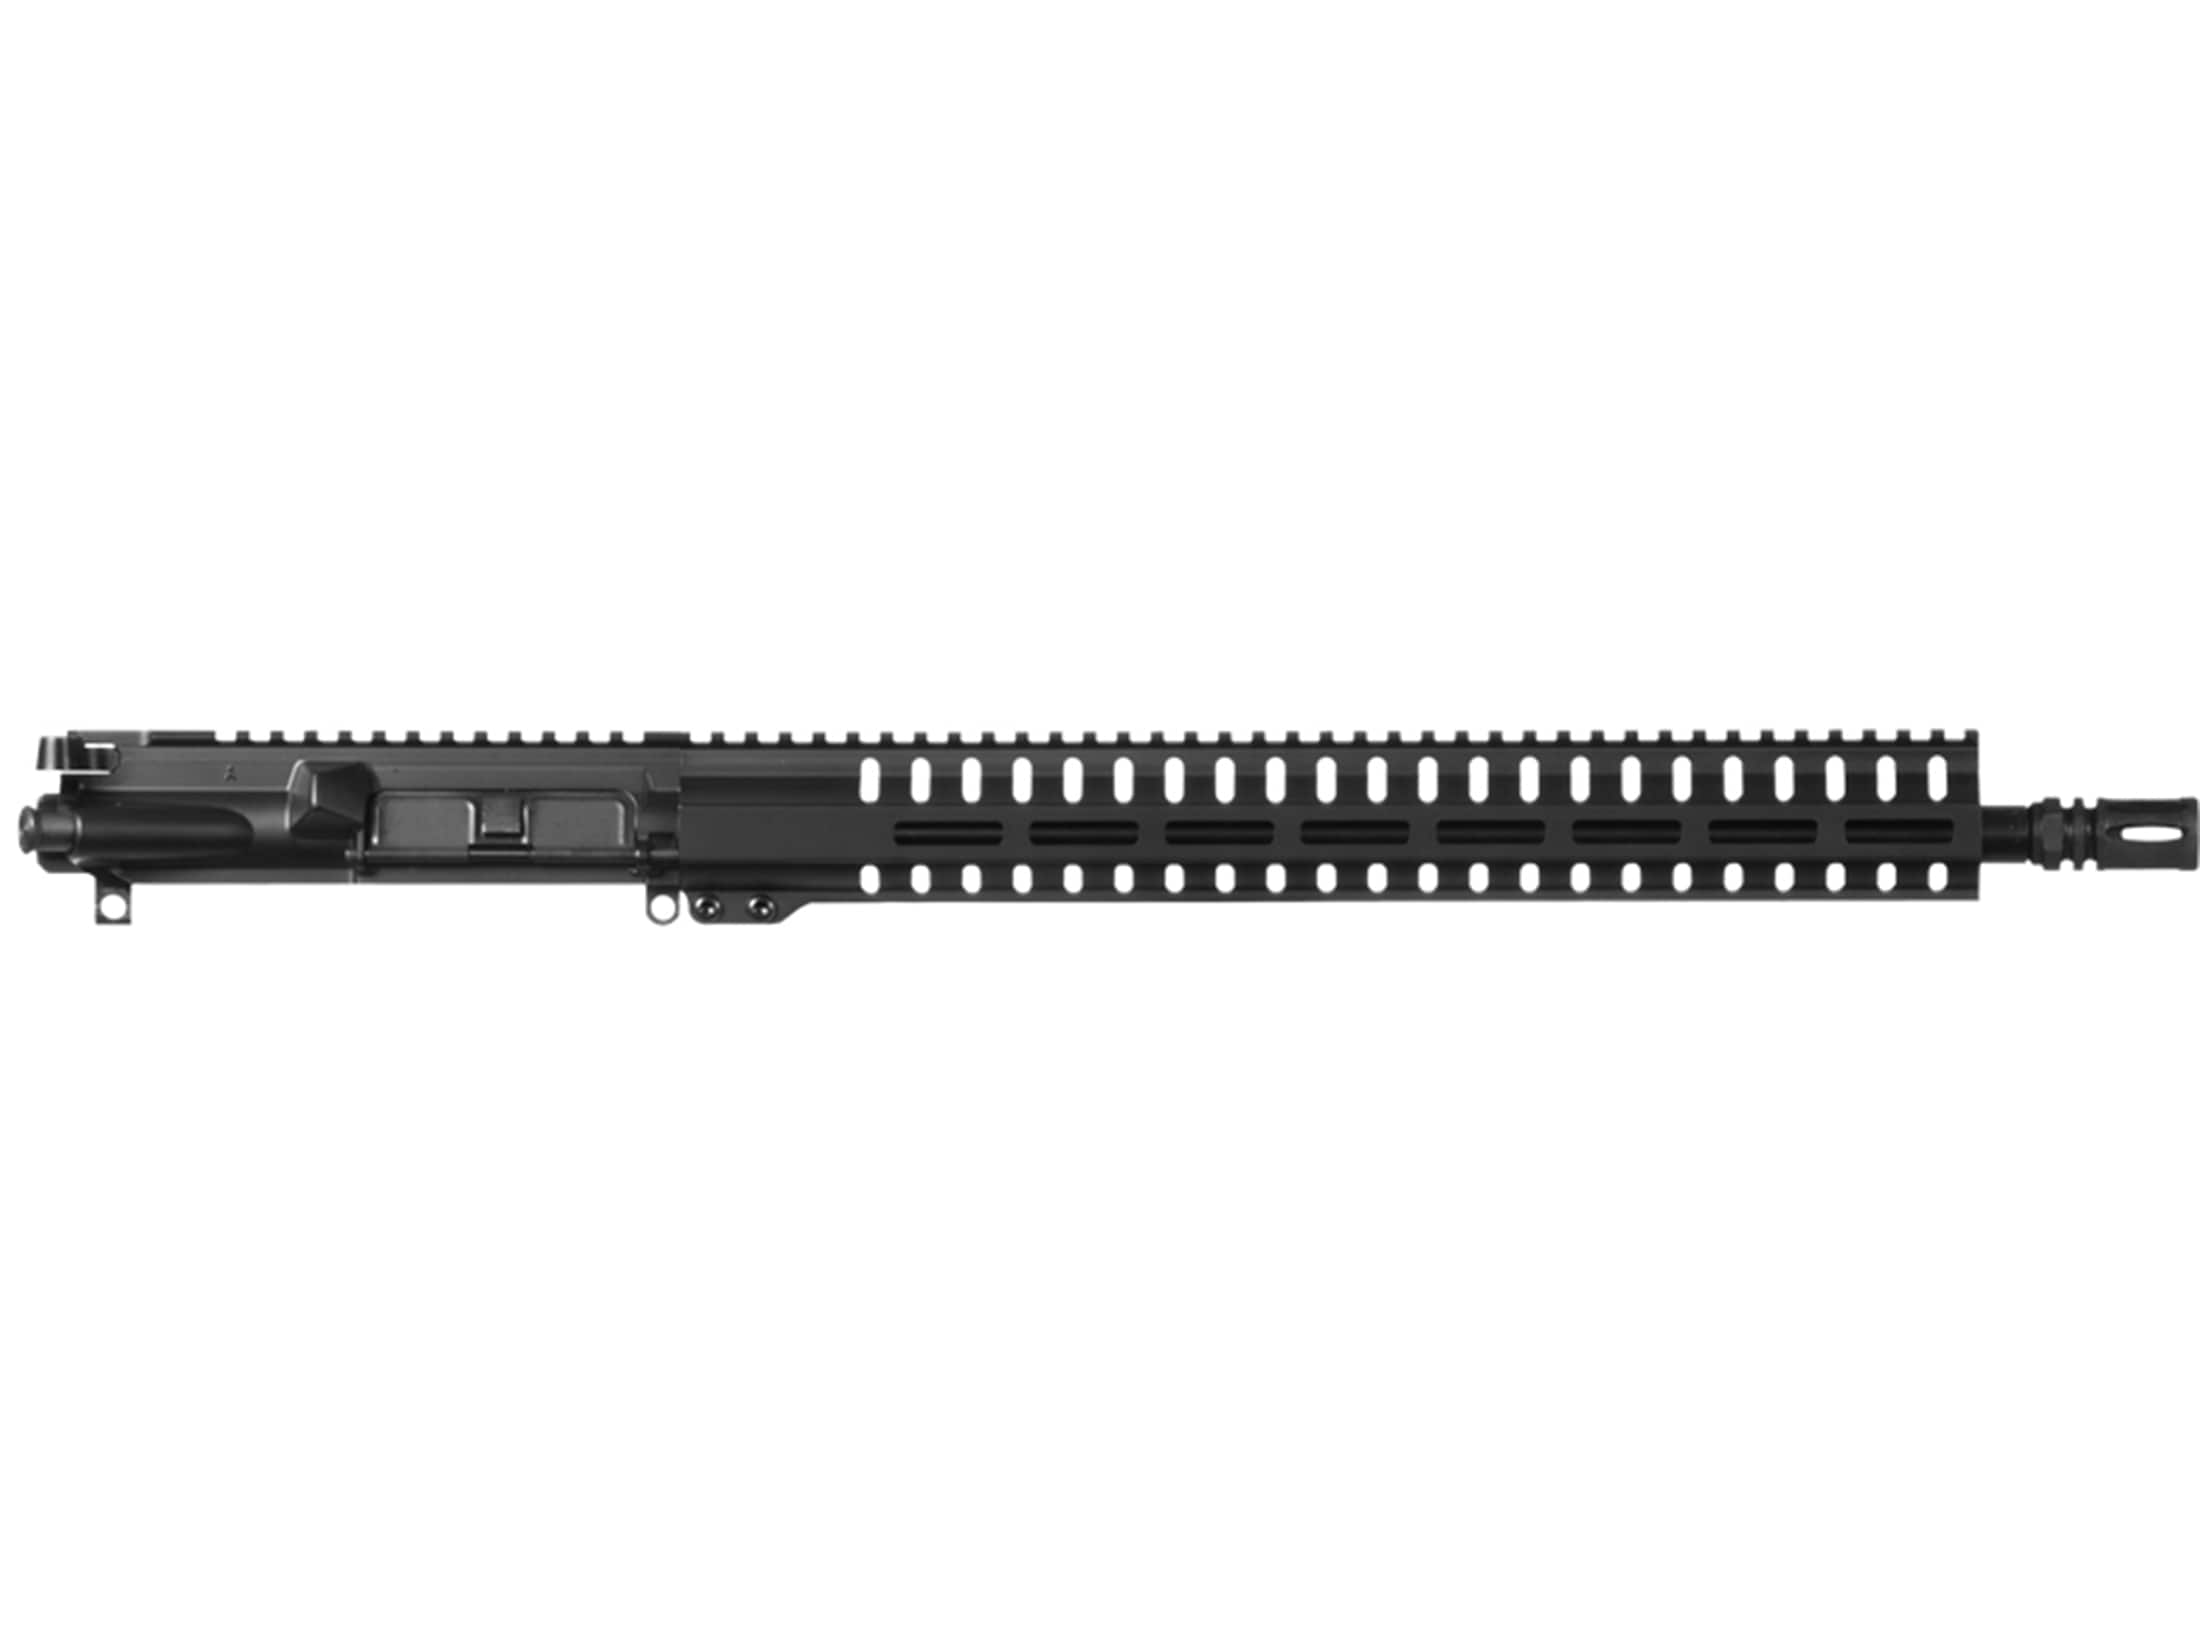 The CMMG Resolute 100 5.7x28mm upper receiver has a 16.1-inch barrel and fe...